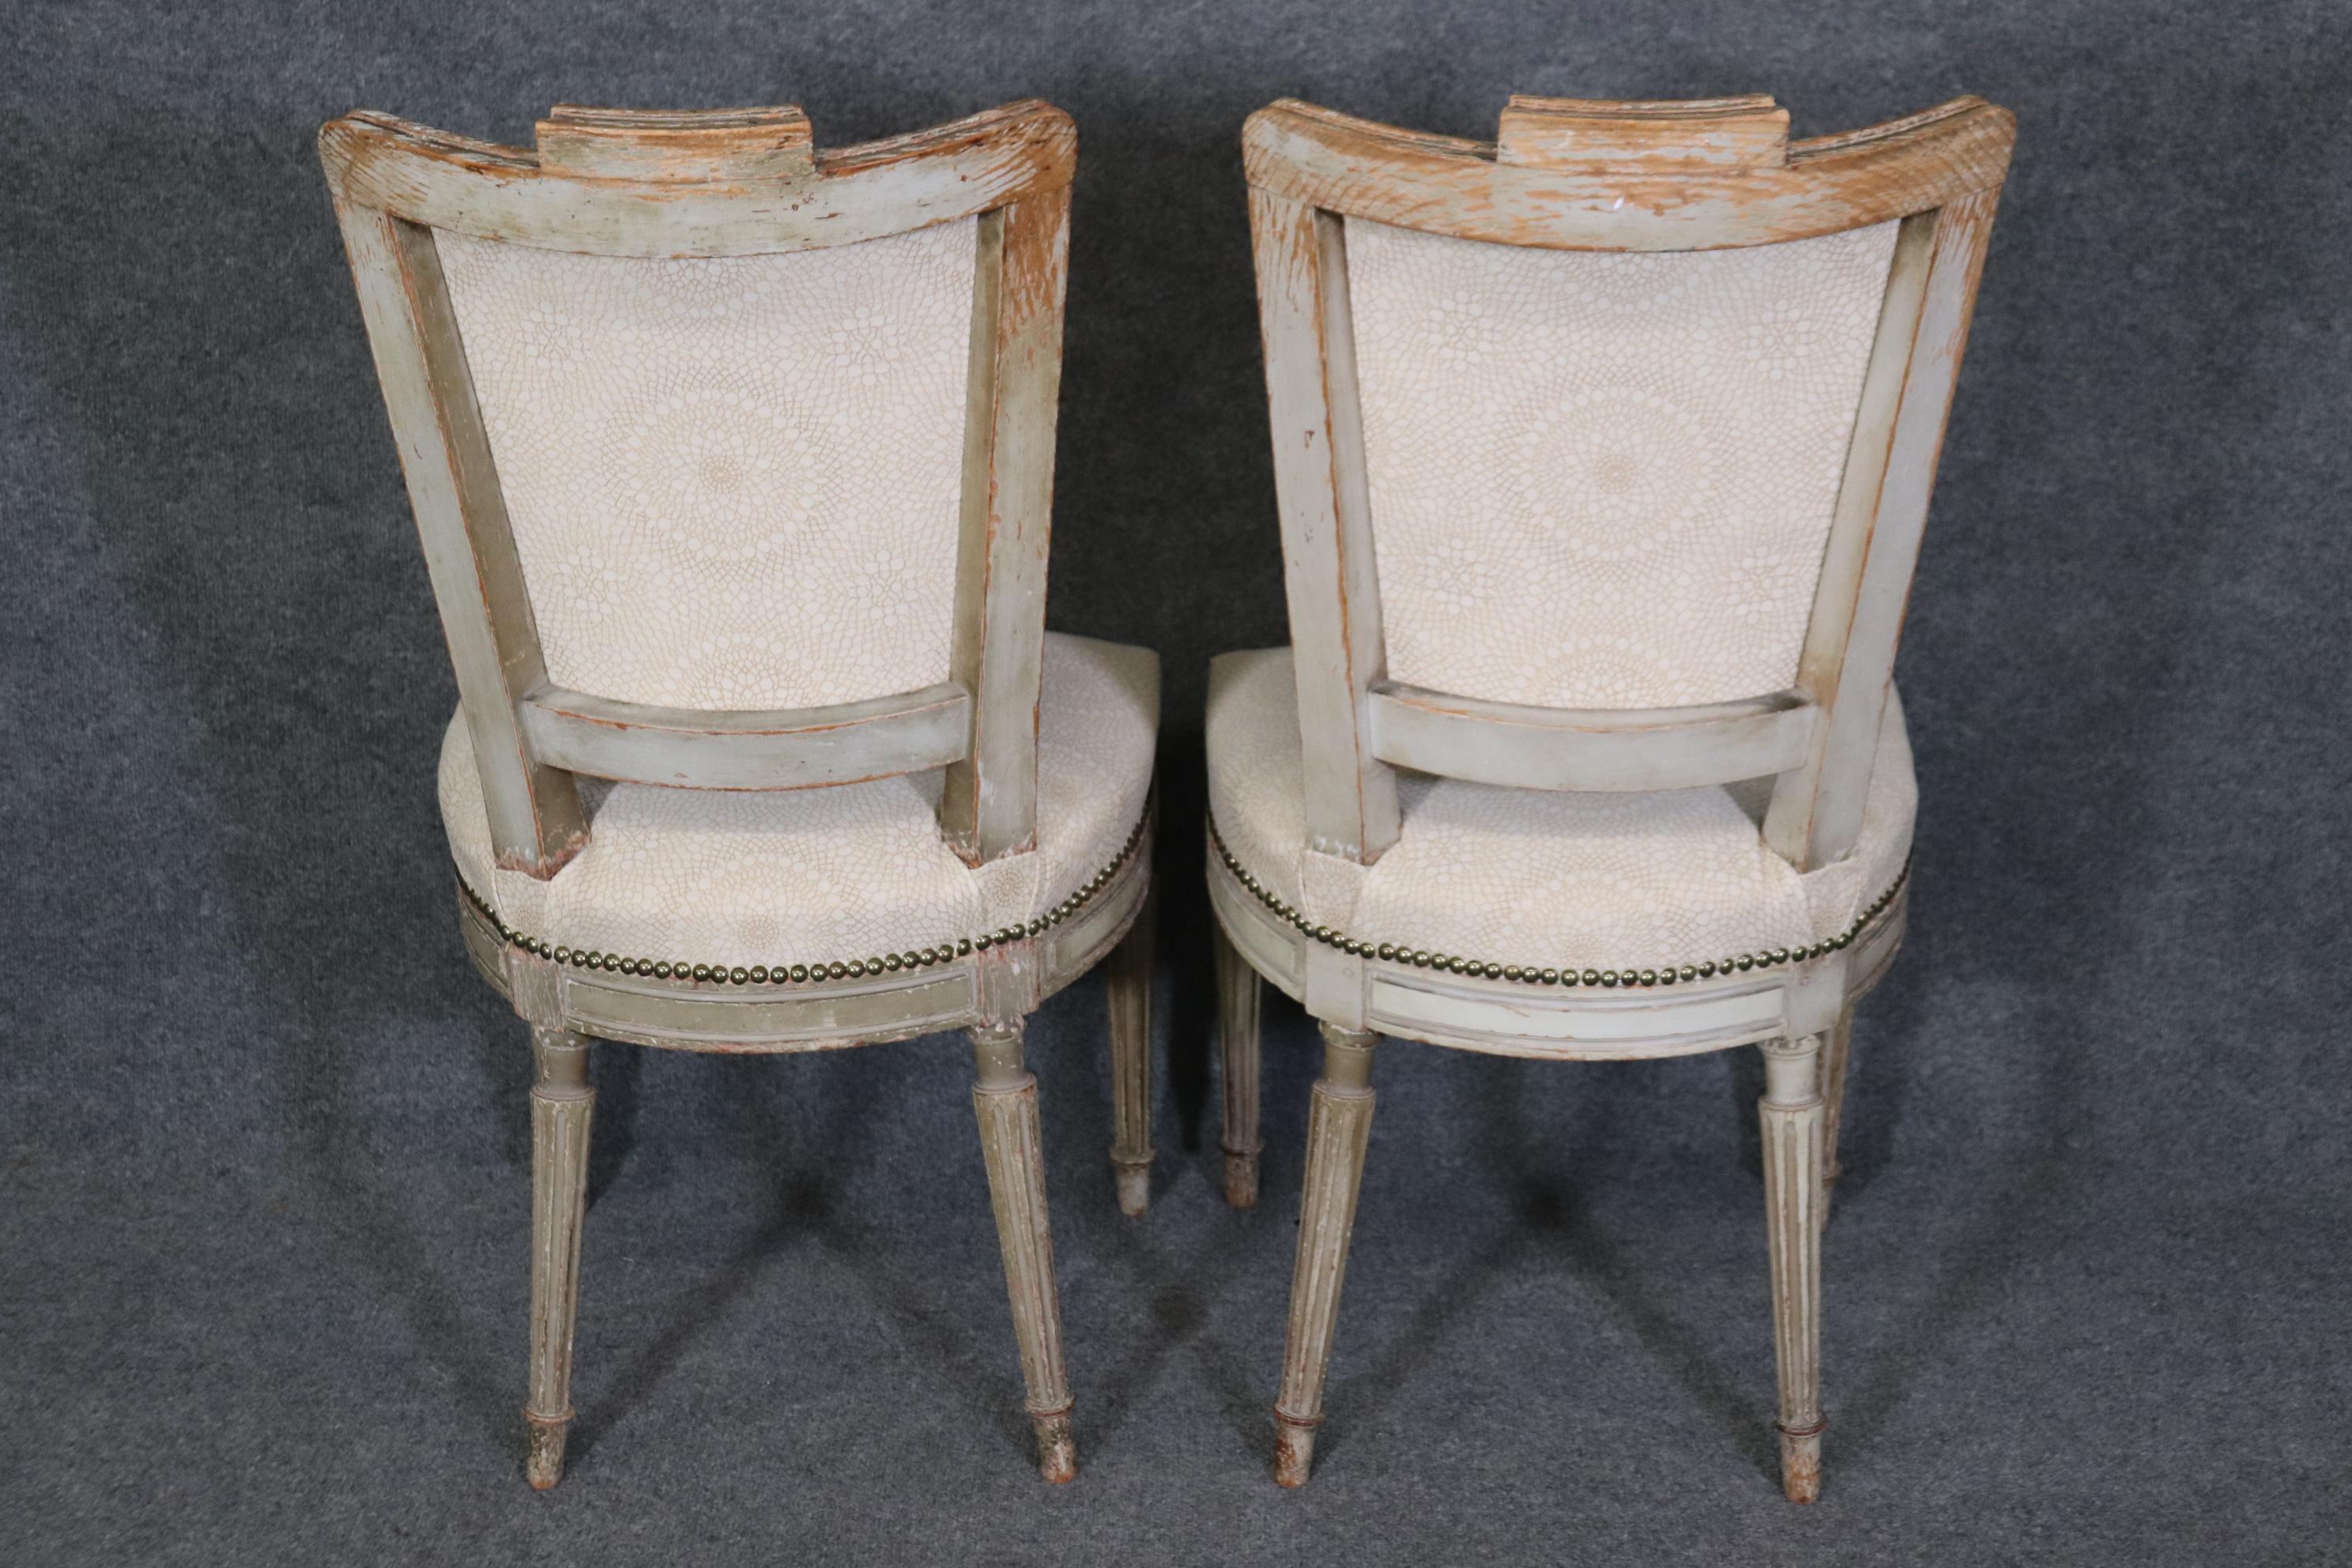 Rare Set of 12 Distressed Paint Decorated Maison Jansen Dining Chairs Circa 1920 In Fair Condition For Sale In Swedesboro, NJ